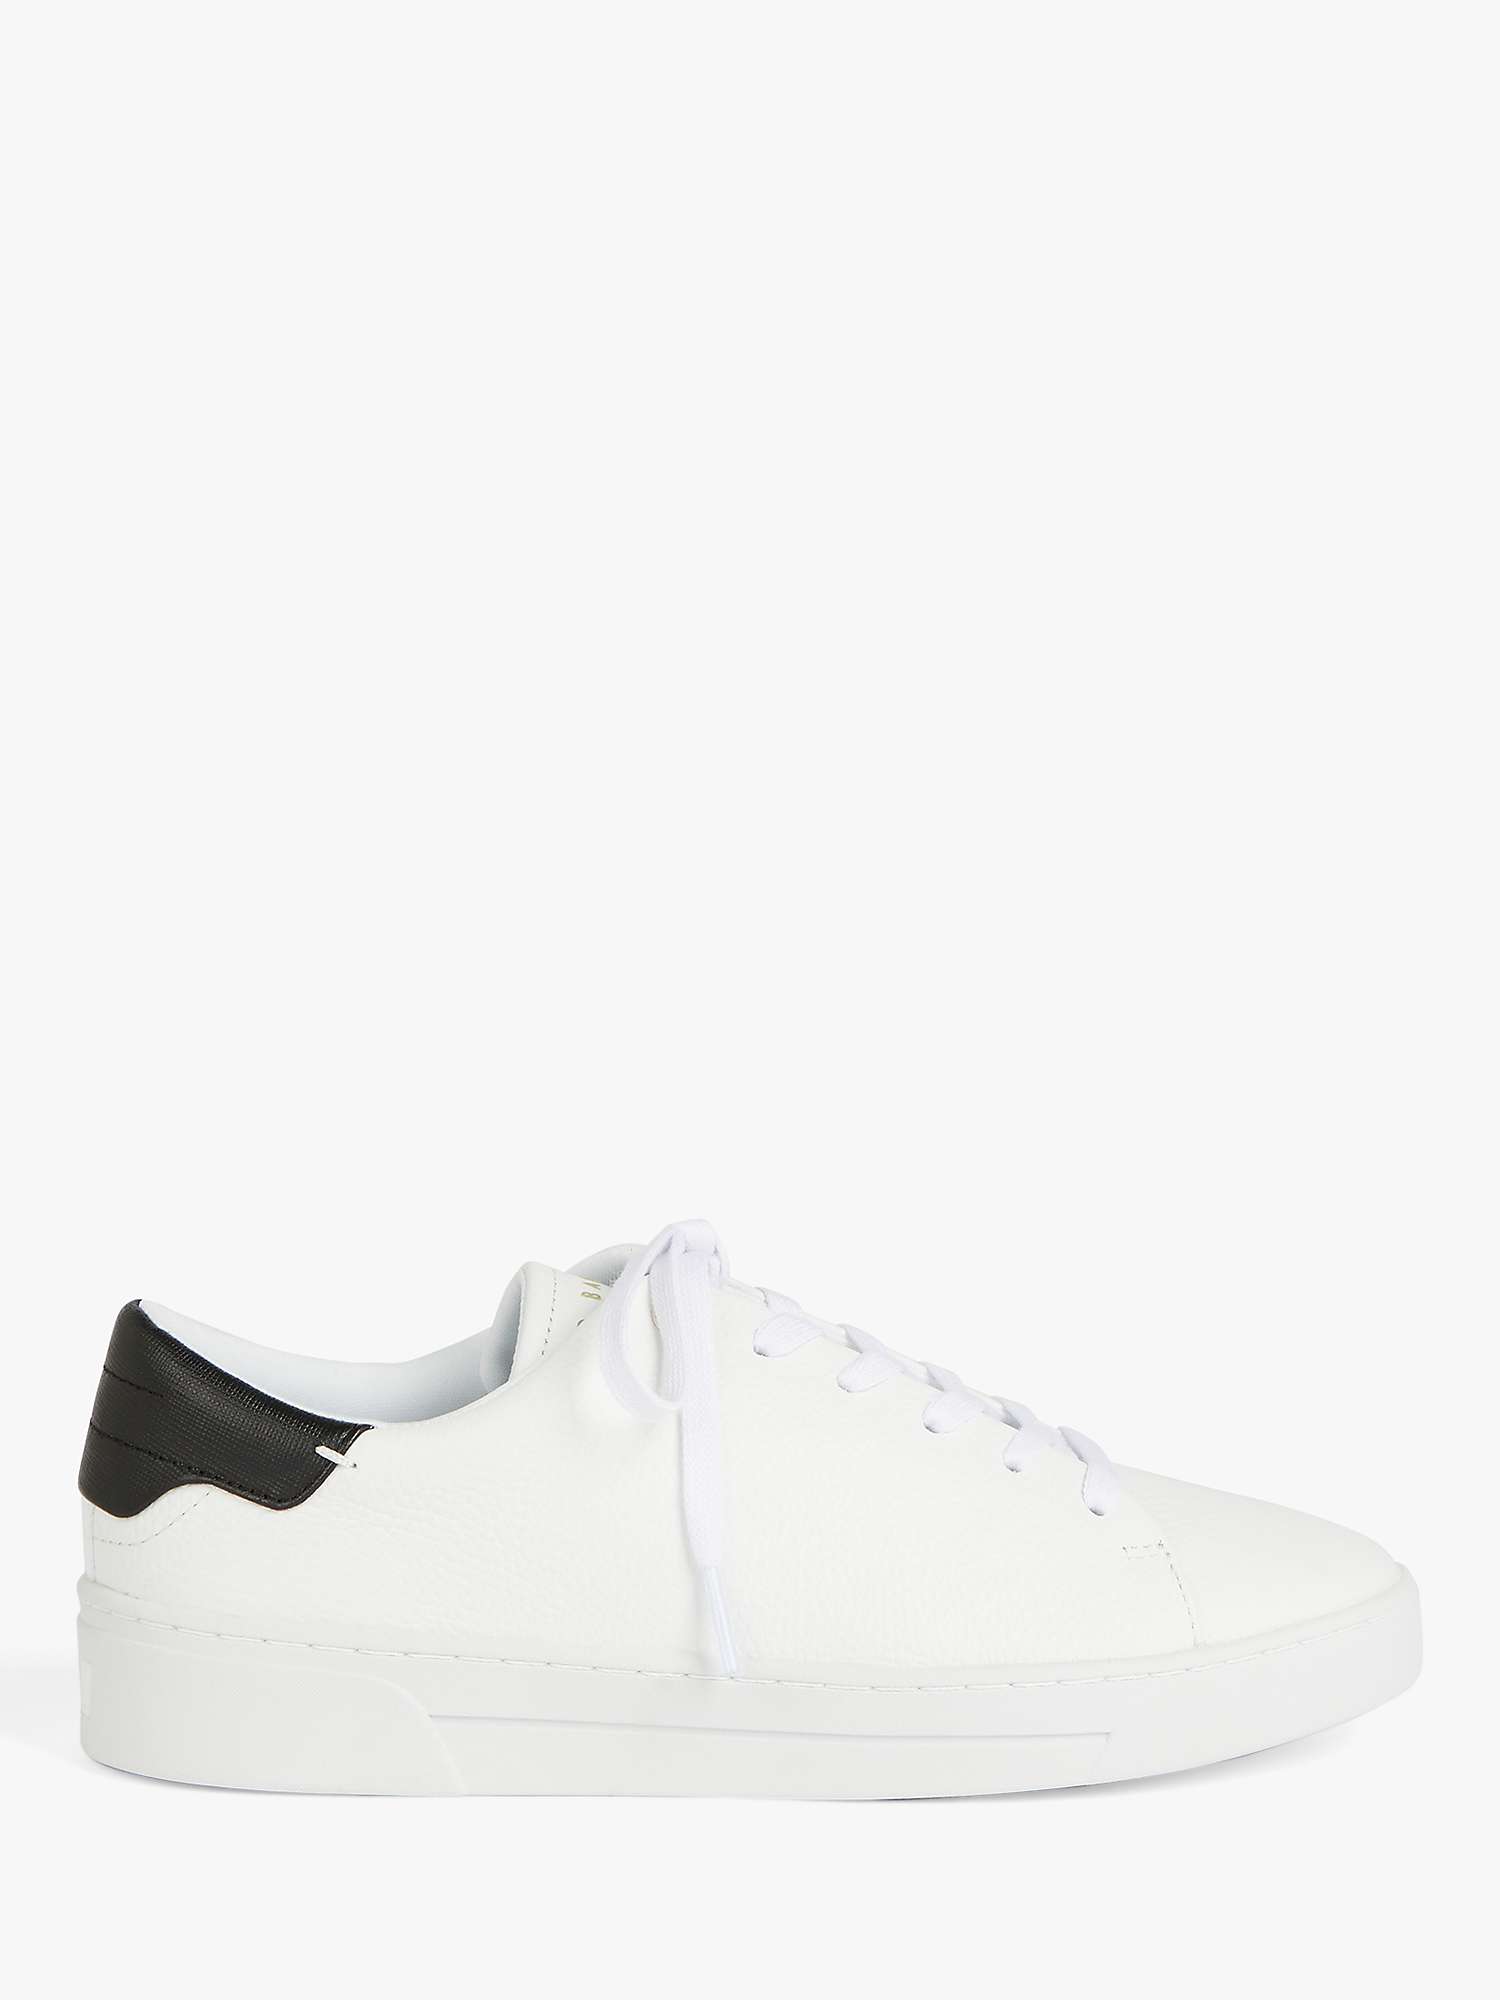 Buy Ted Baker Tumbled Leather Low Top Trainers, White/Black Online at johnlewis.com